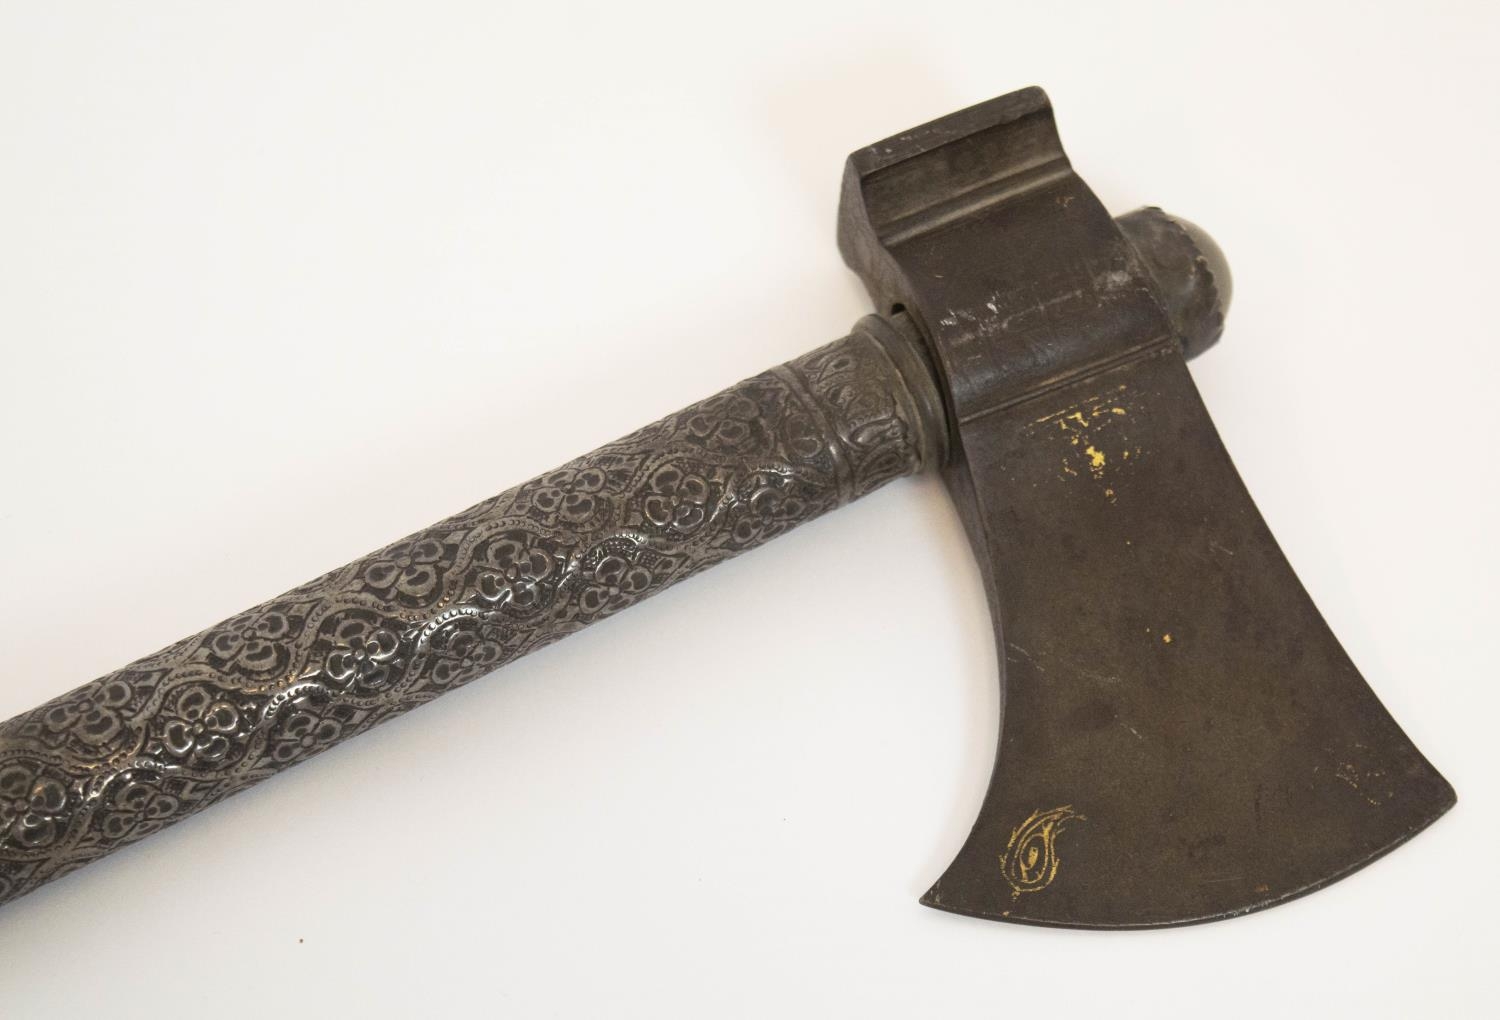 A 'TARBARZIN' PERSIAN SADDLE AXE, 19th century, traces of gilt decoration to blade with rock crystal - Image 2 of 9